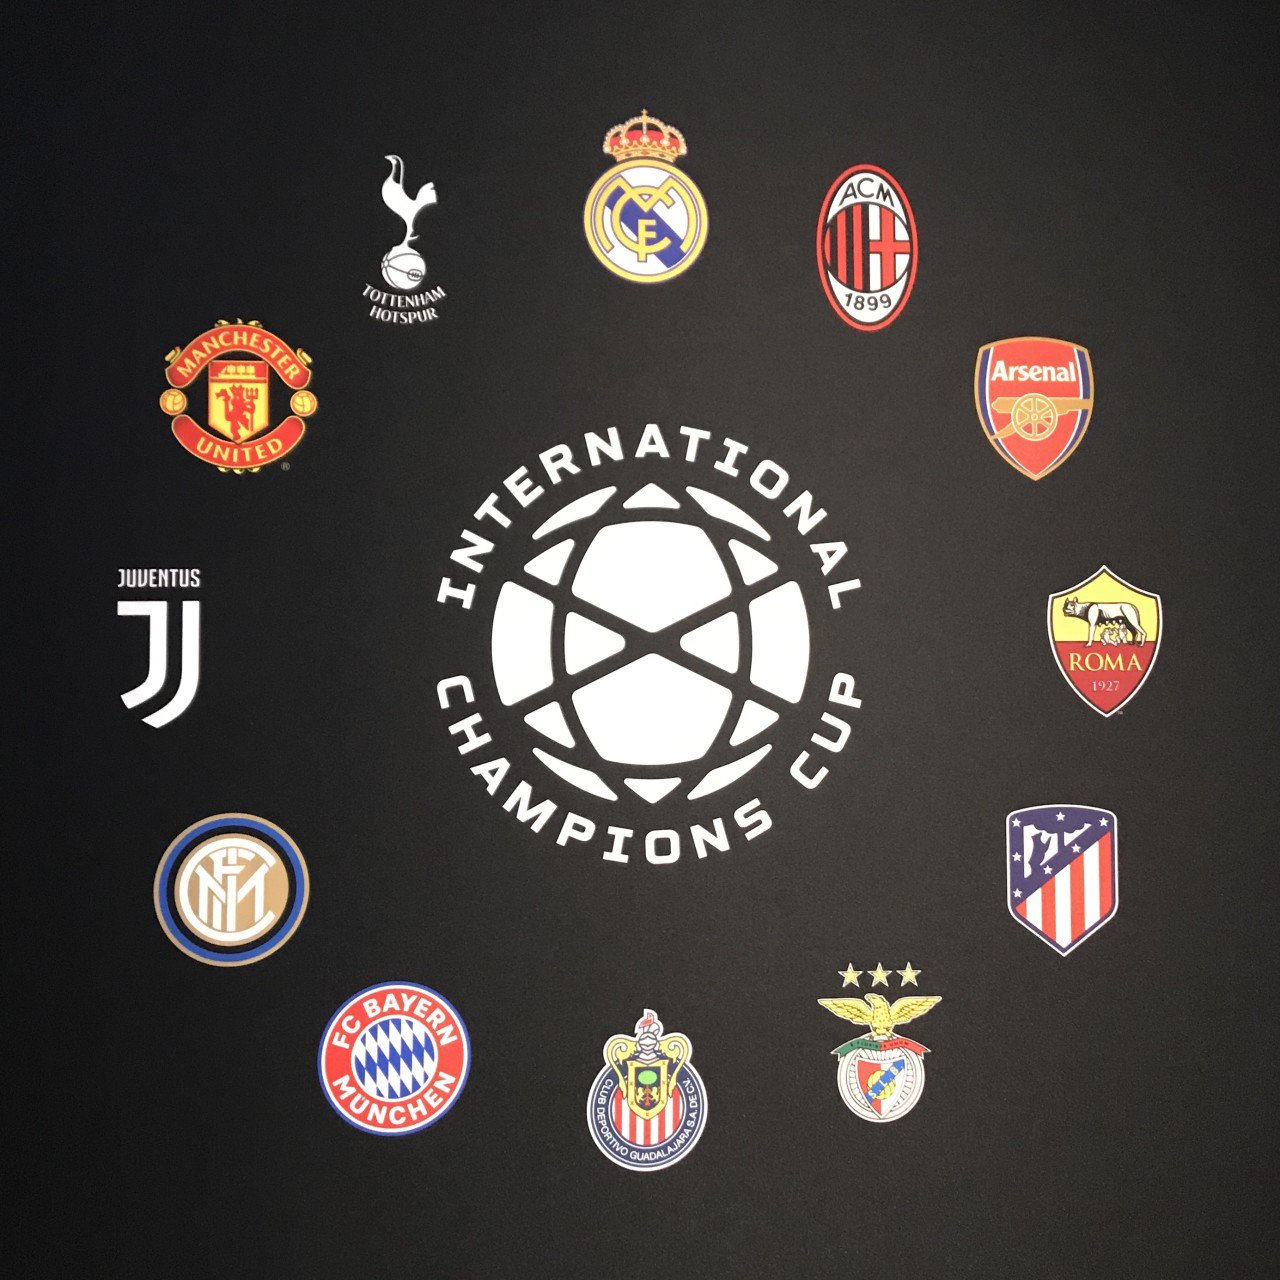 International Champions Cup The Icc19 Winners Will Be Championsmeethere T Co Livua5otoq Twitter